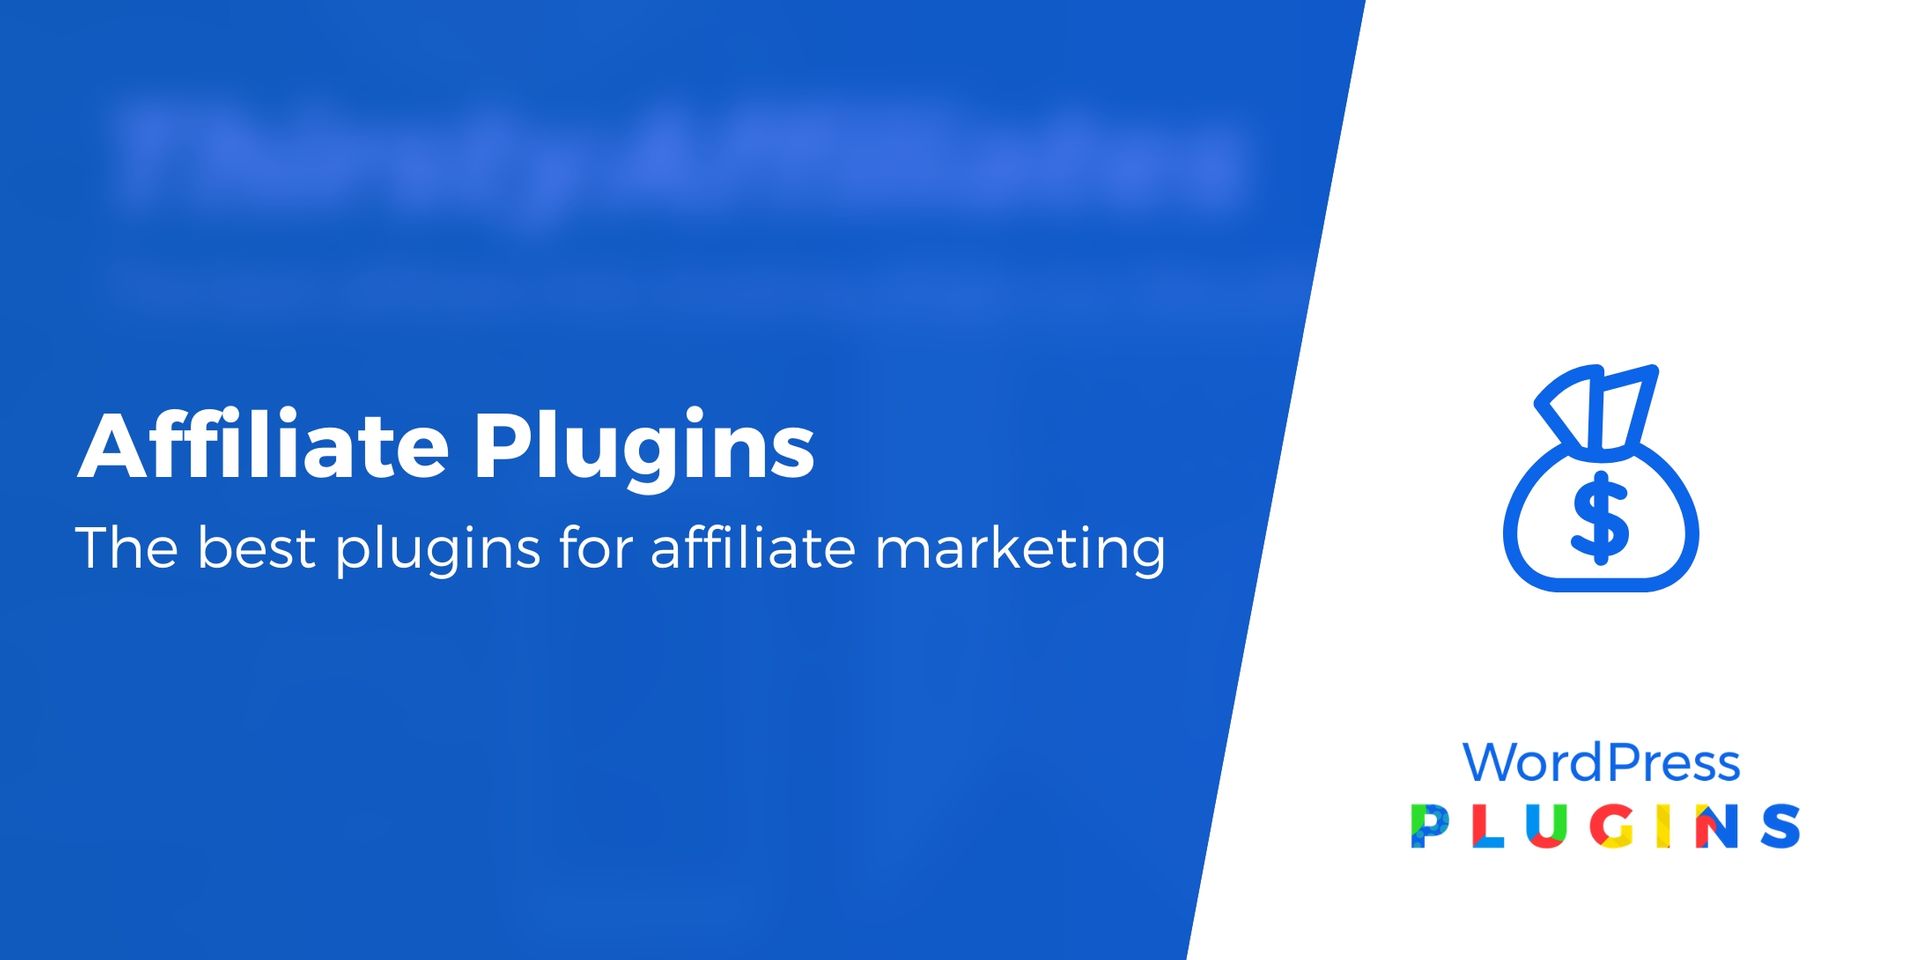 10 Best Affiliate Marketing Tools and Plugins for WordPress